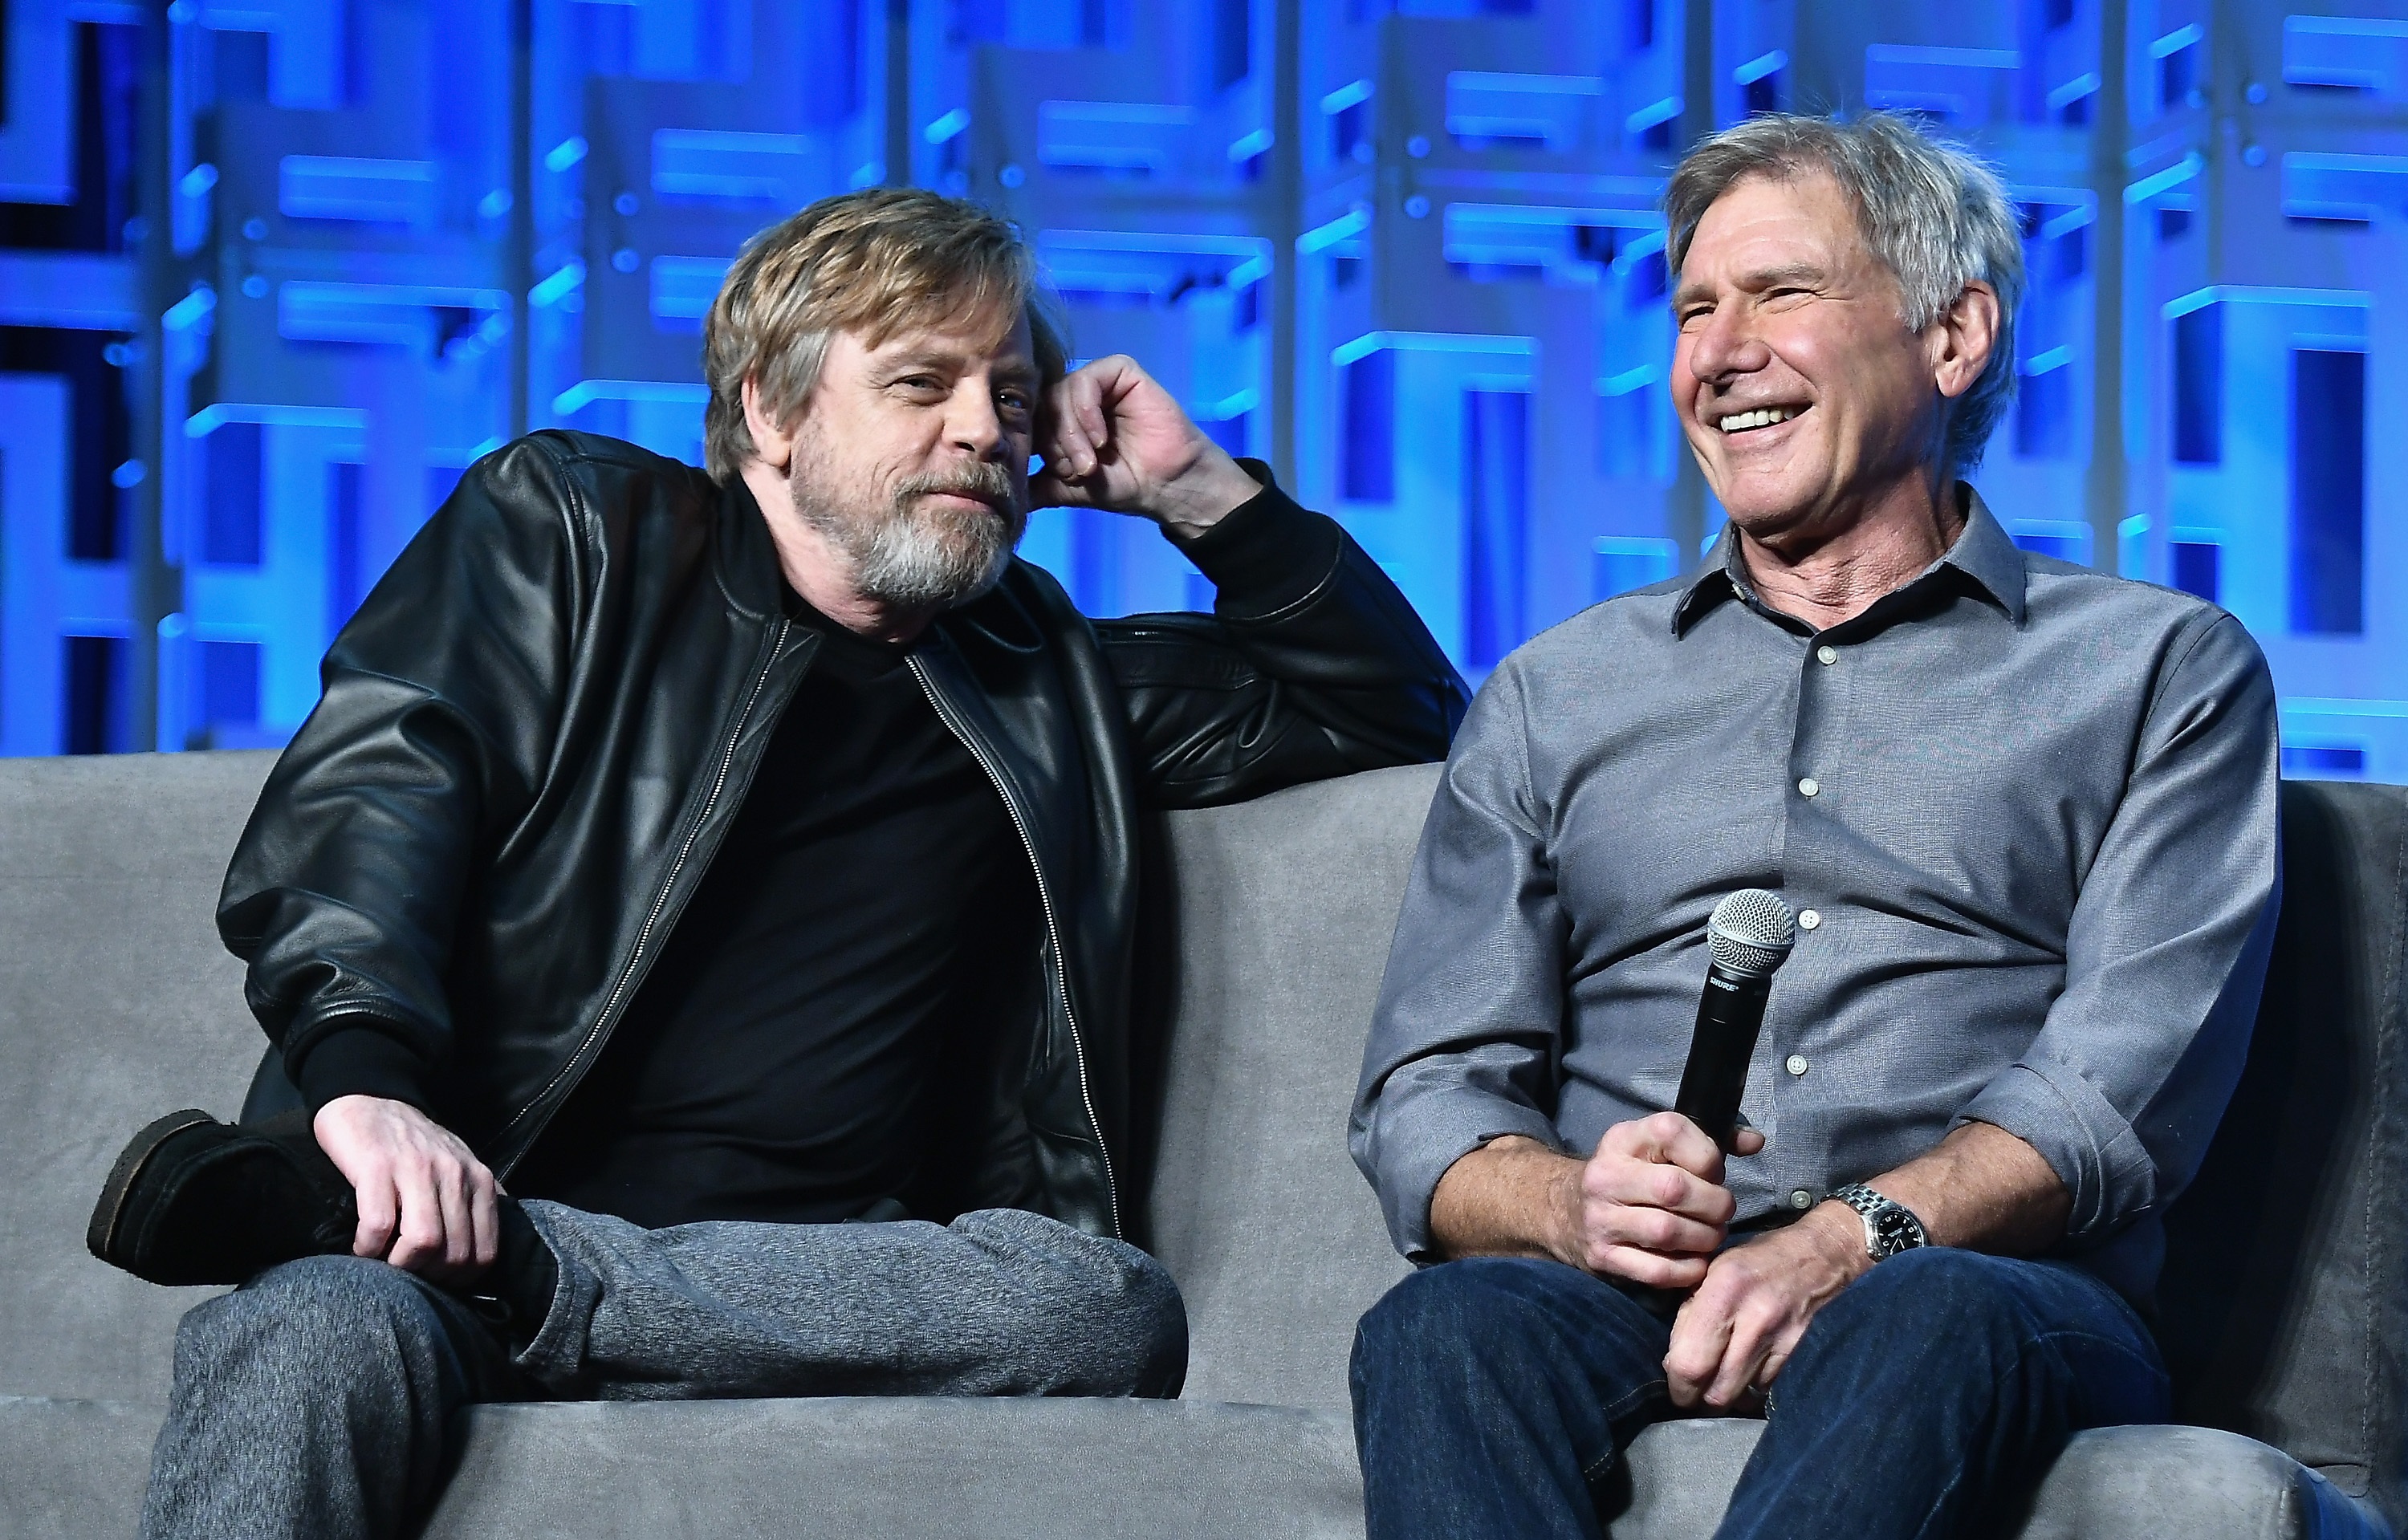 'Star Wars' Mark Hamill and Harrison Ford